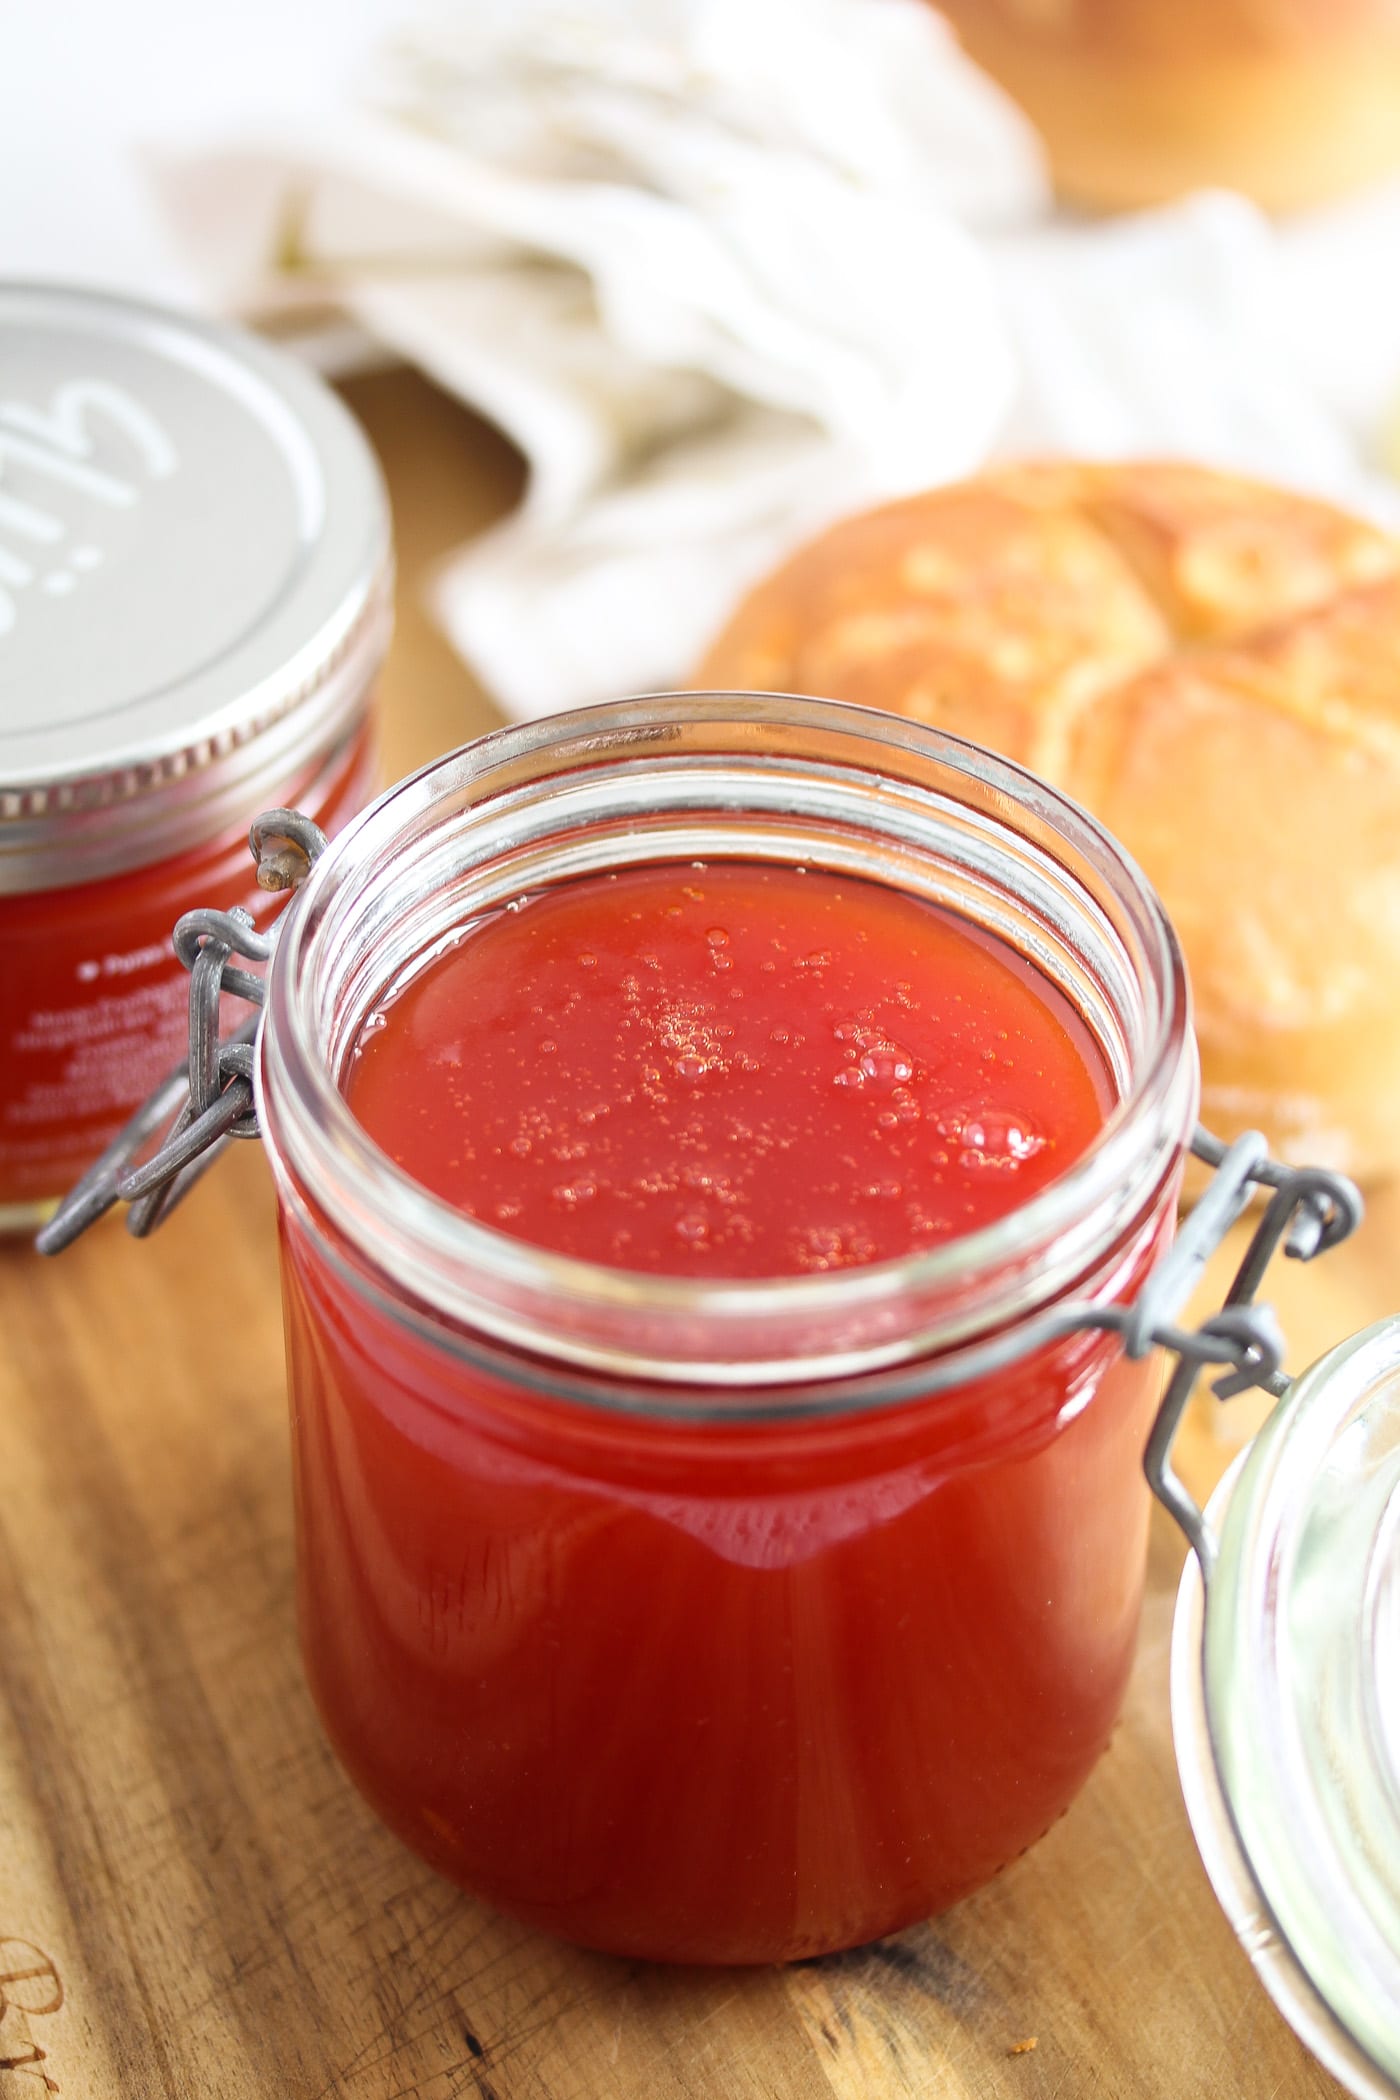 red jelly in a jar with bread rolls behind